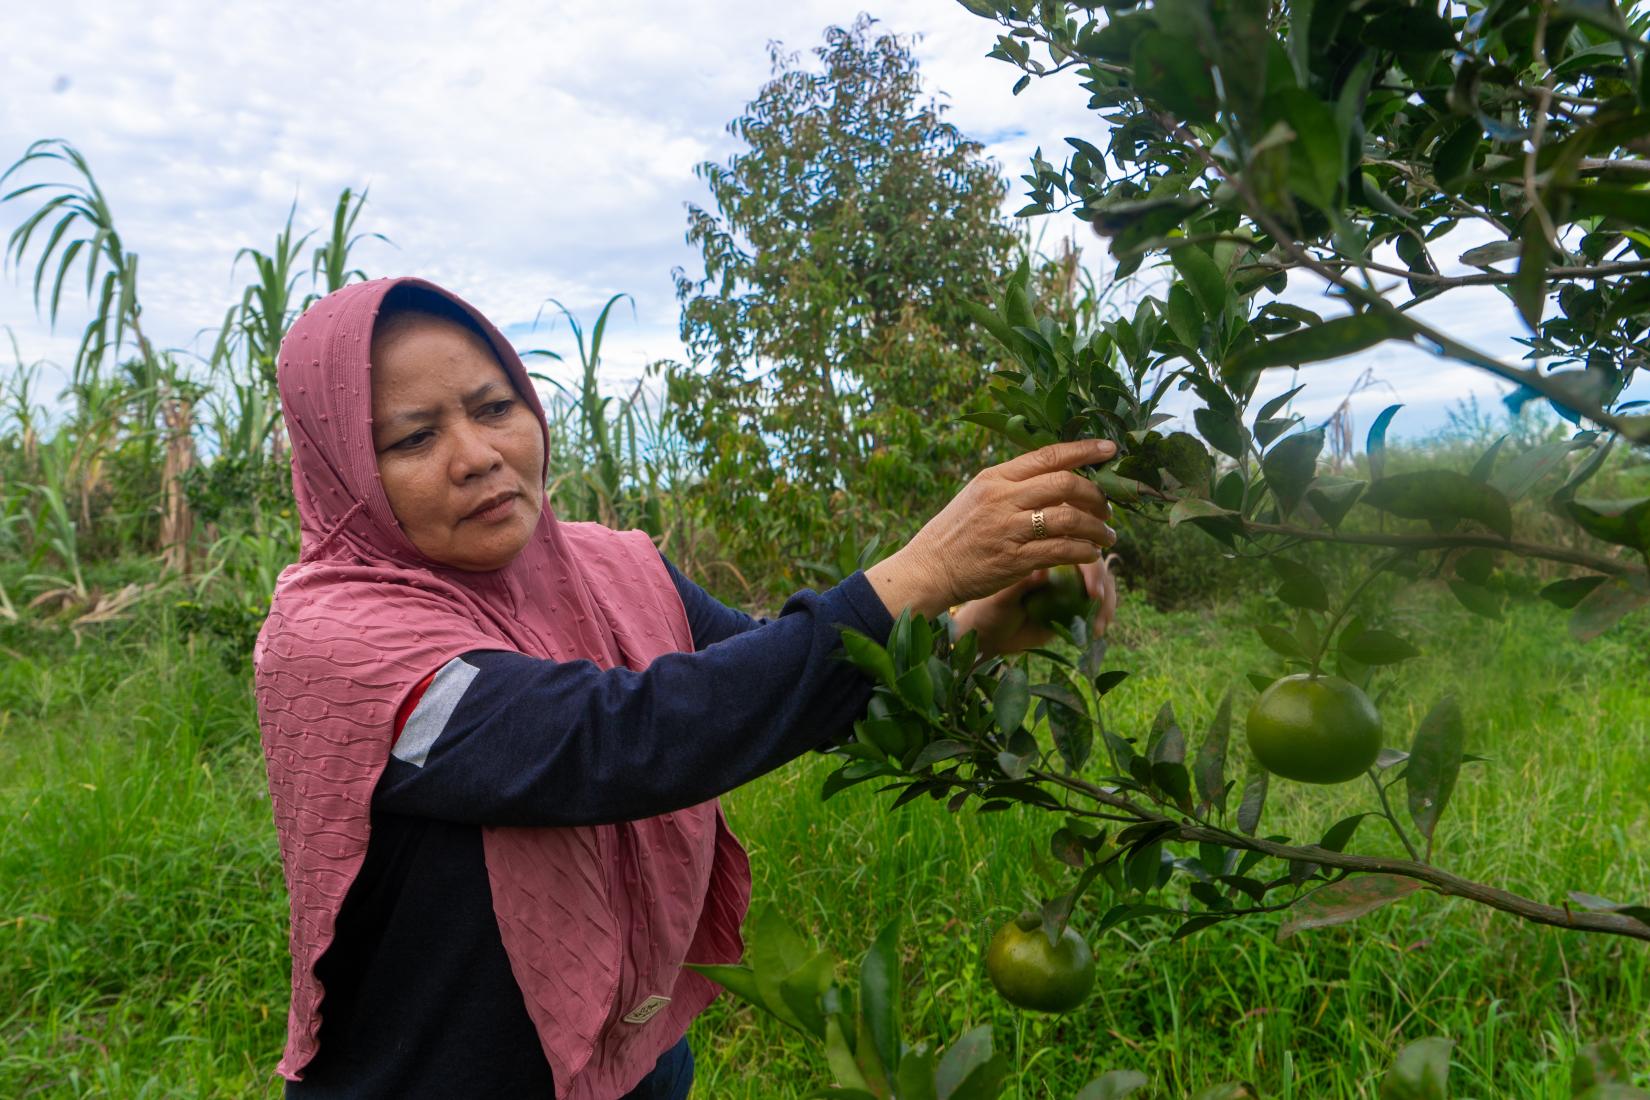 A woman in hijab harvesting some fruits